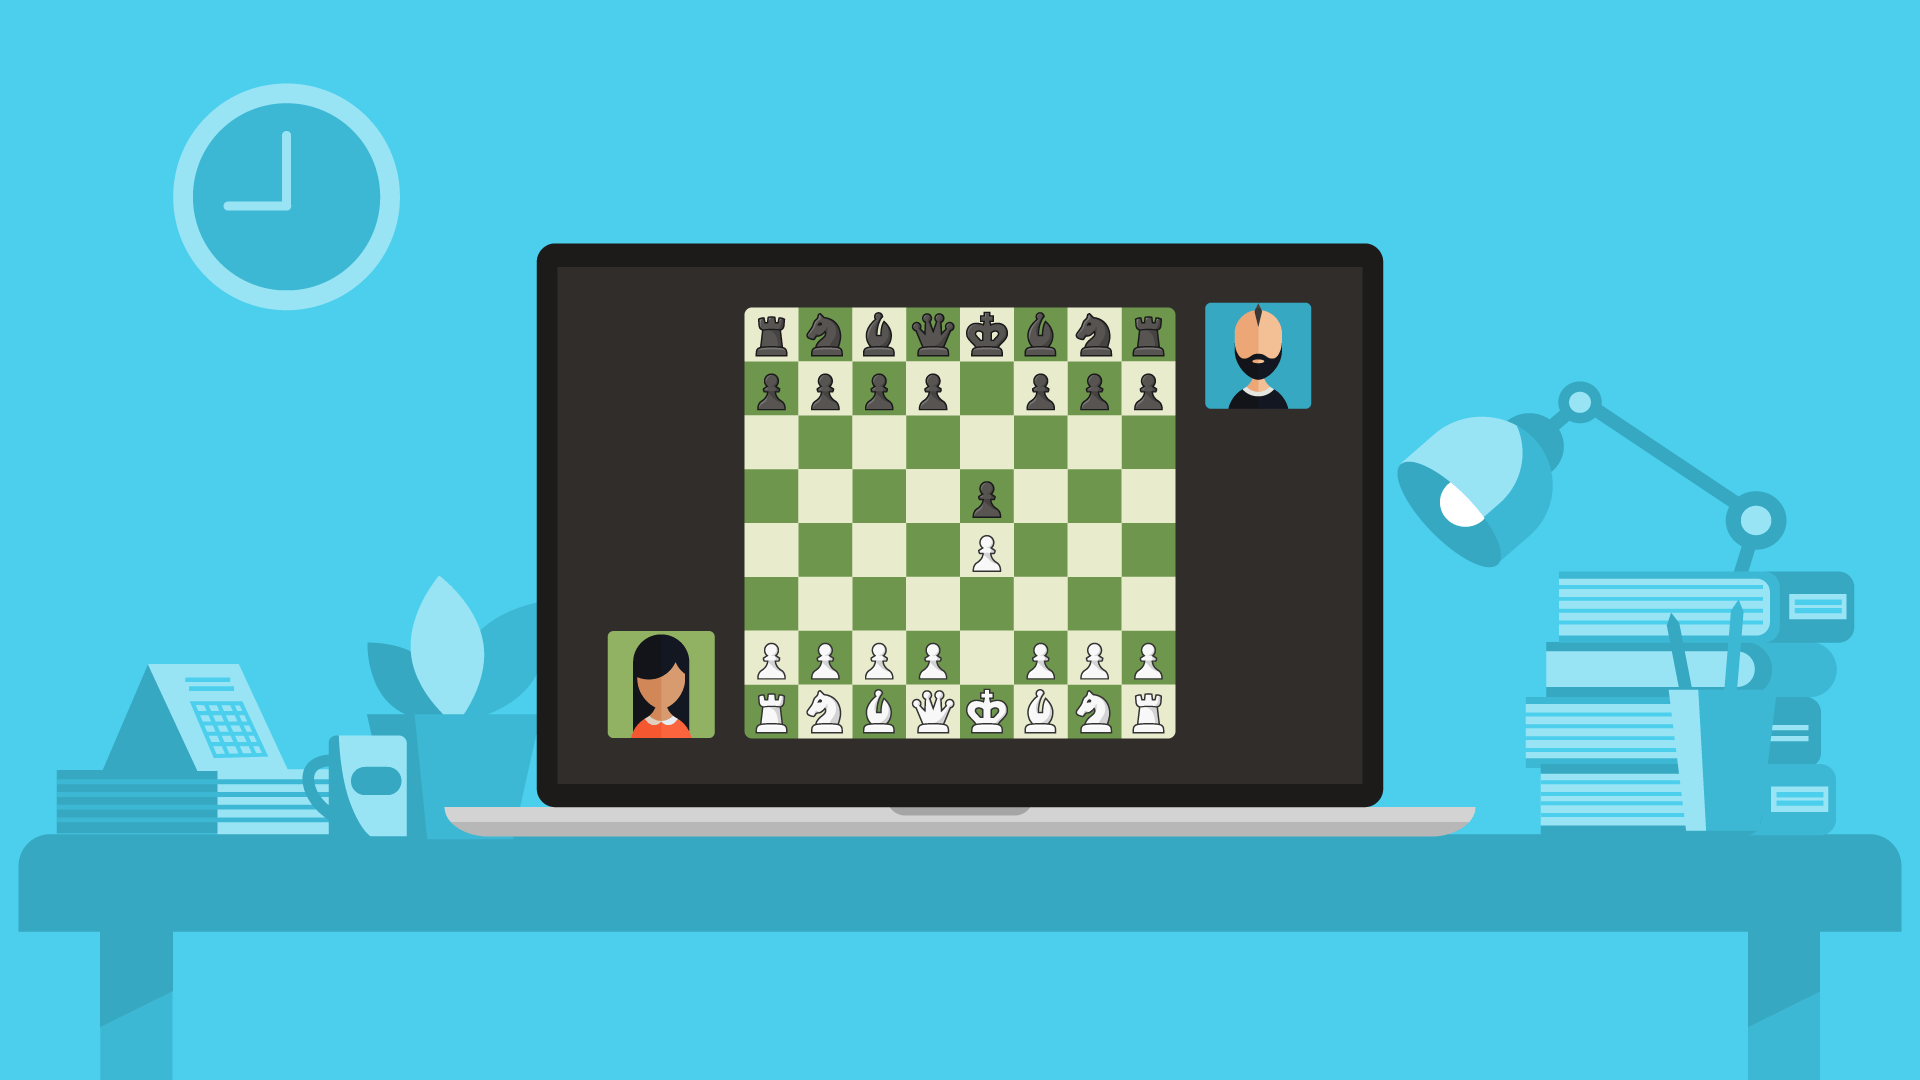 With chat online chess SparkChess: Play